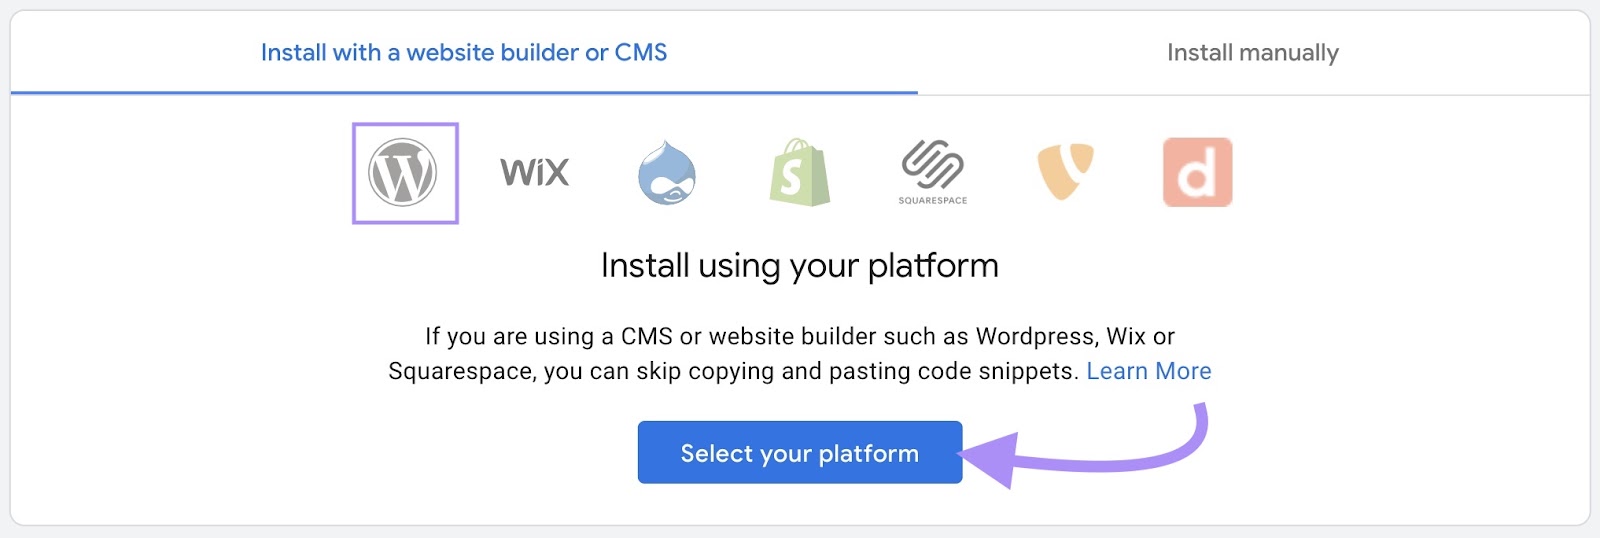 “Install with a website builder or CMS" tab